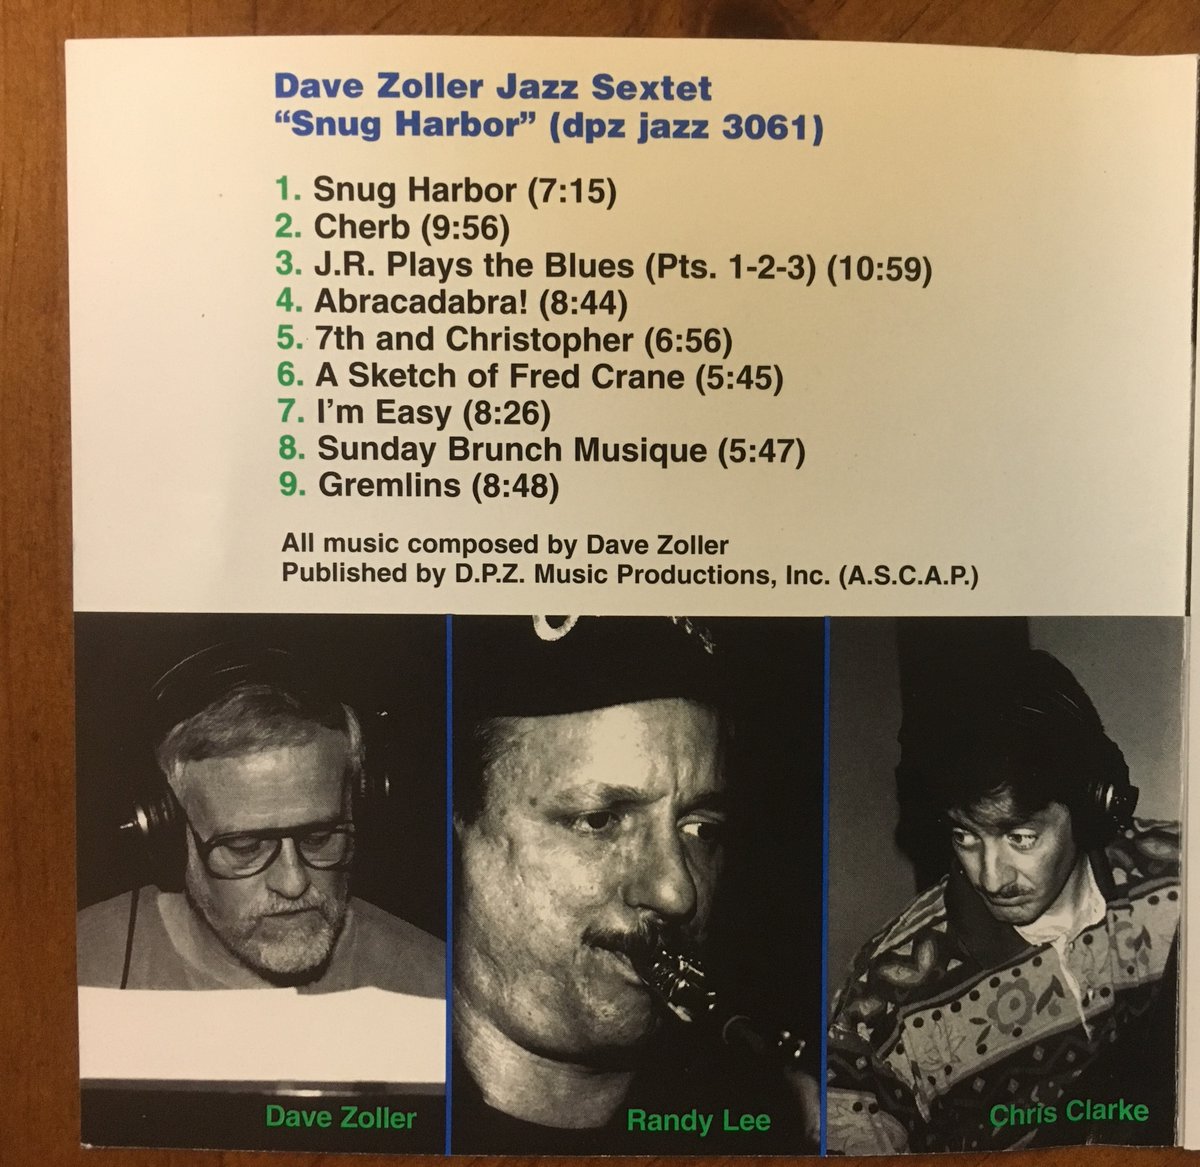 Dad's masterpiece, IMO, is Evidence, his tribute to Monk on the centennial of his birth, available as a 3-record set or as a 2-CD set. He recorded many more albums, with his own bands and in collaboration with other composers. Info at this link:  https://www.dpzrecords.com/shop.html 